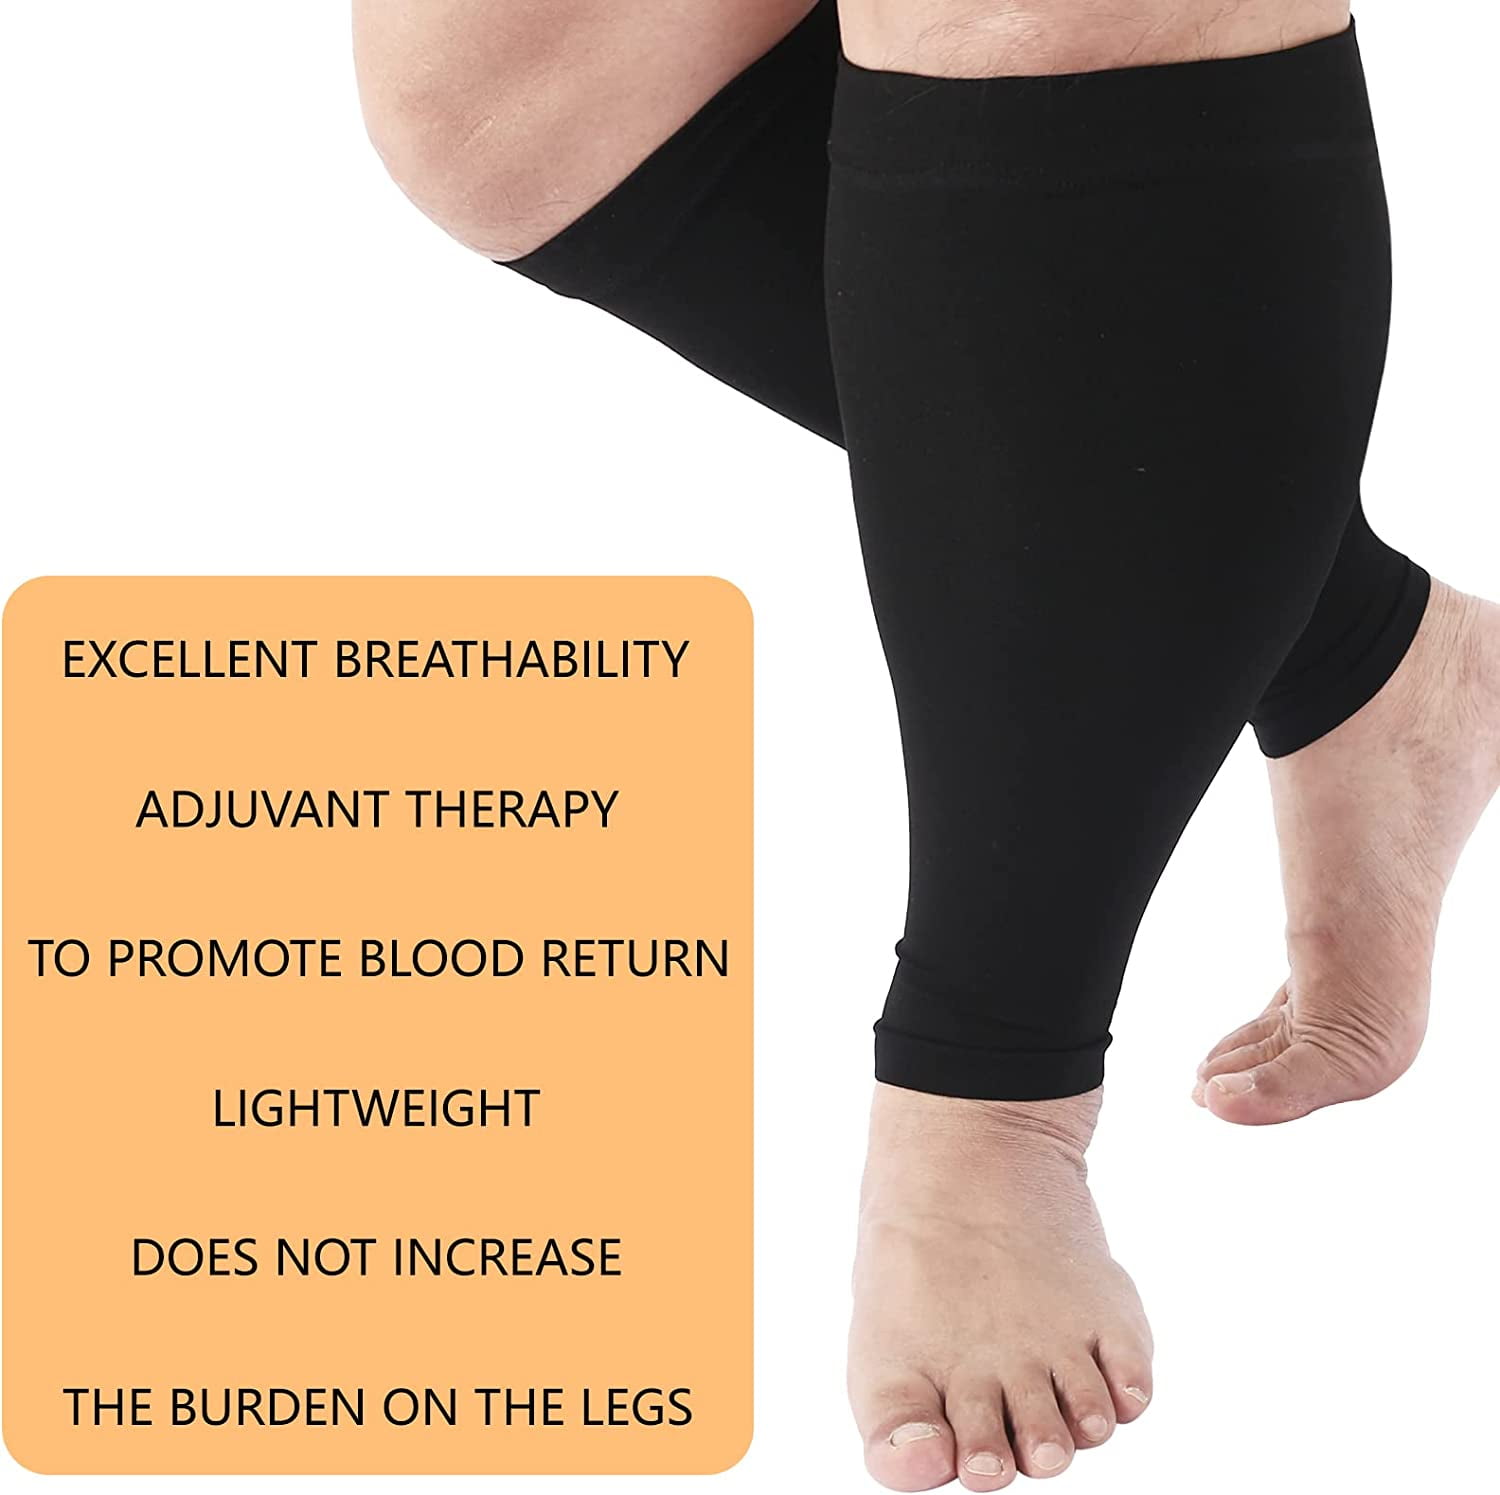 Plus Size Compression Sleeves for Calves Women Wide Calf Compression Legs  Sleeves Men L, Relieve Varicose Veins, Edema, Swelling, Soreness, Shin  splints, for Work, Travel, Sports and Daily Wear 